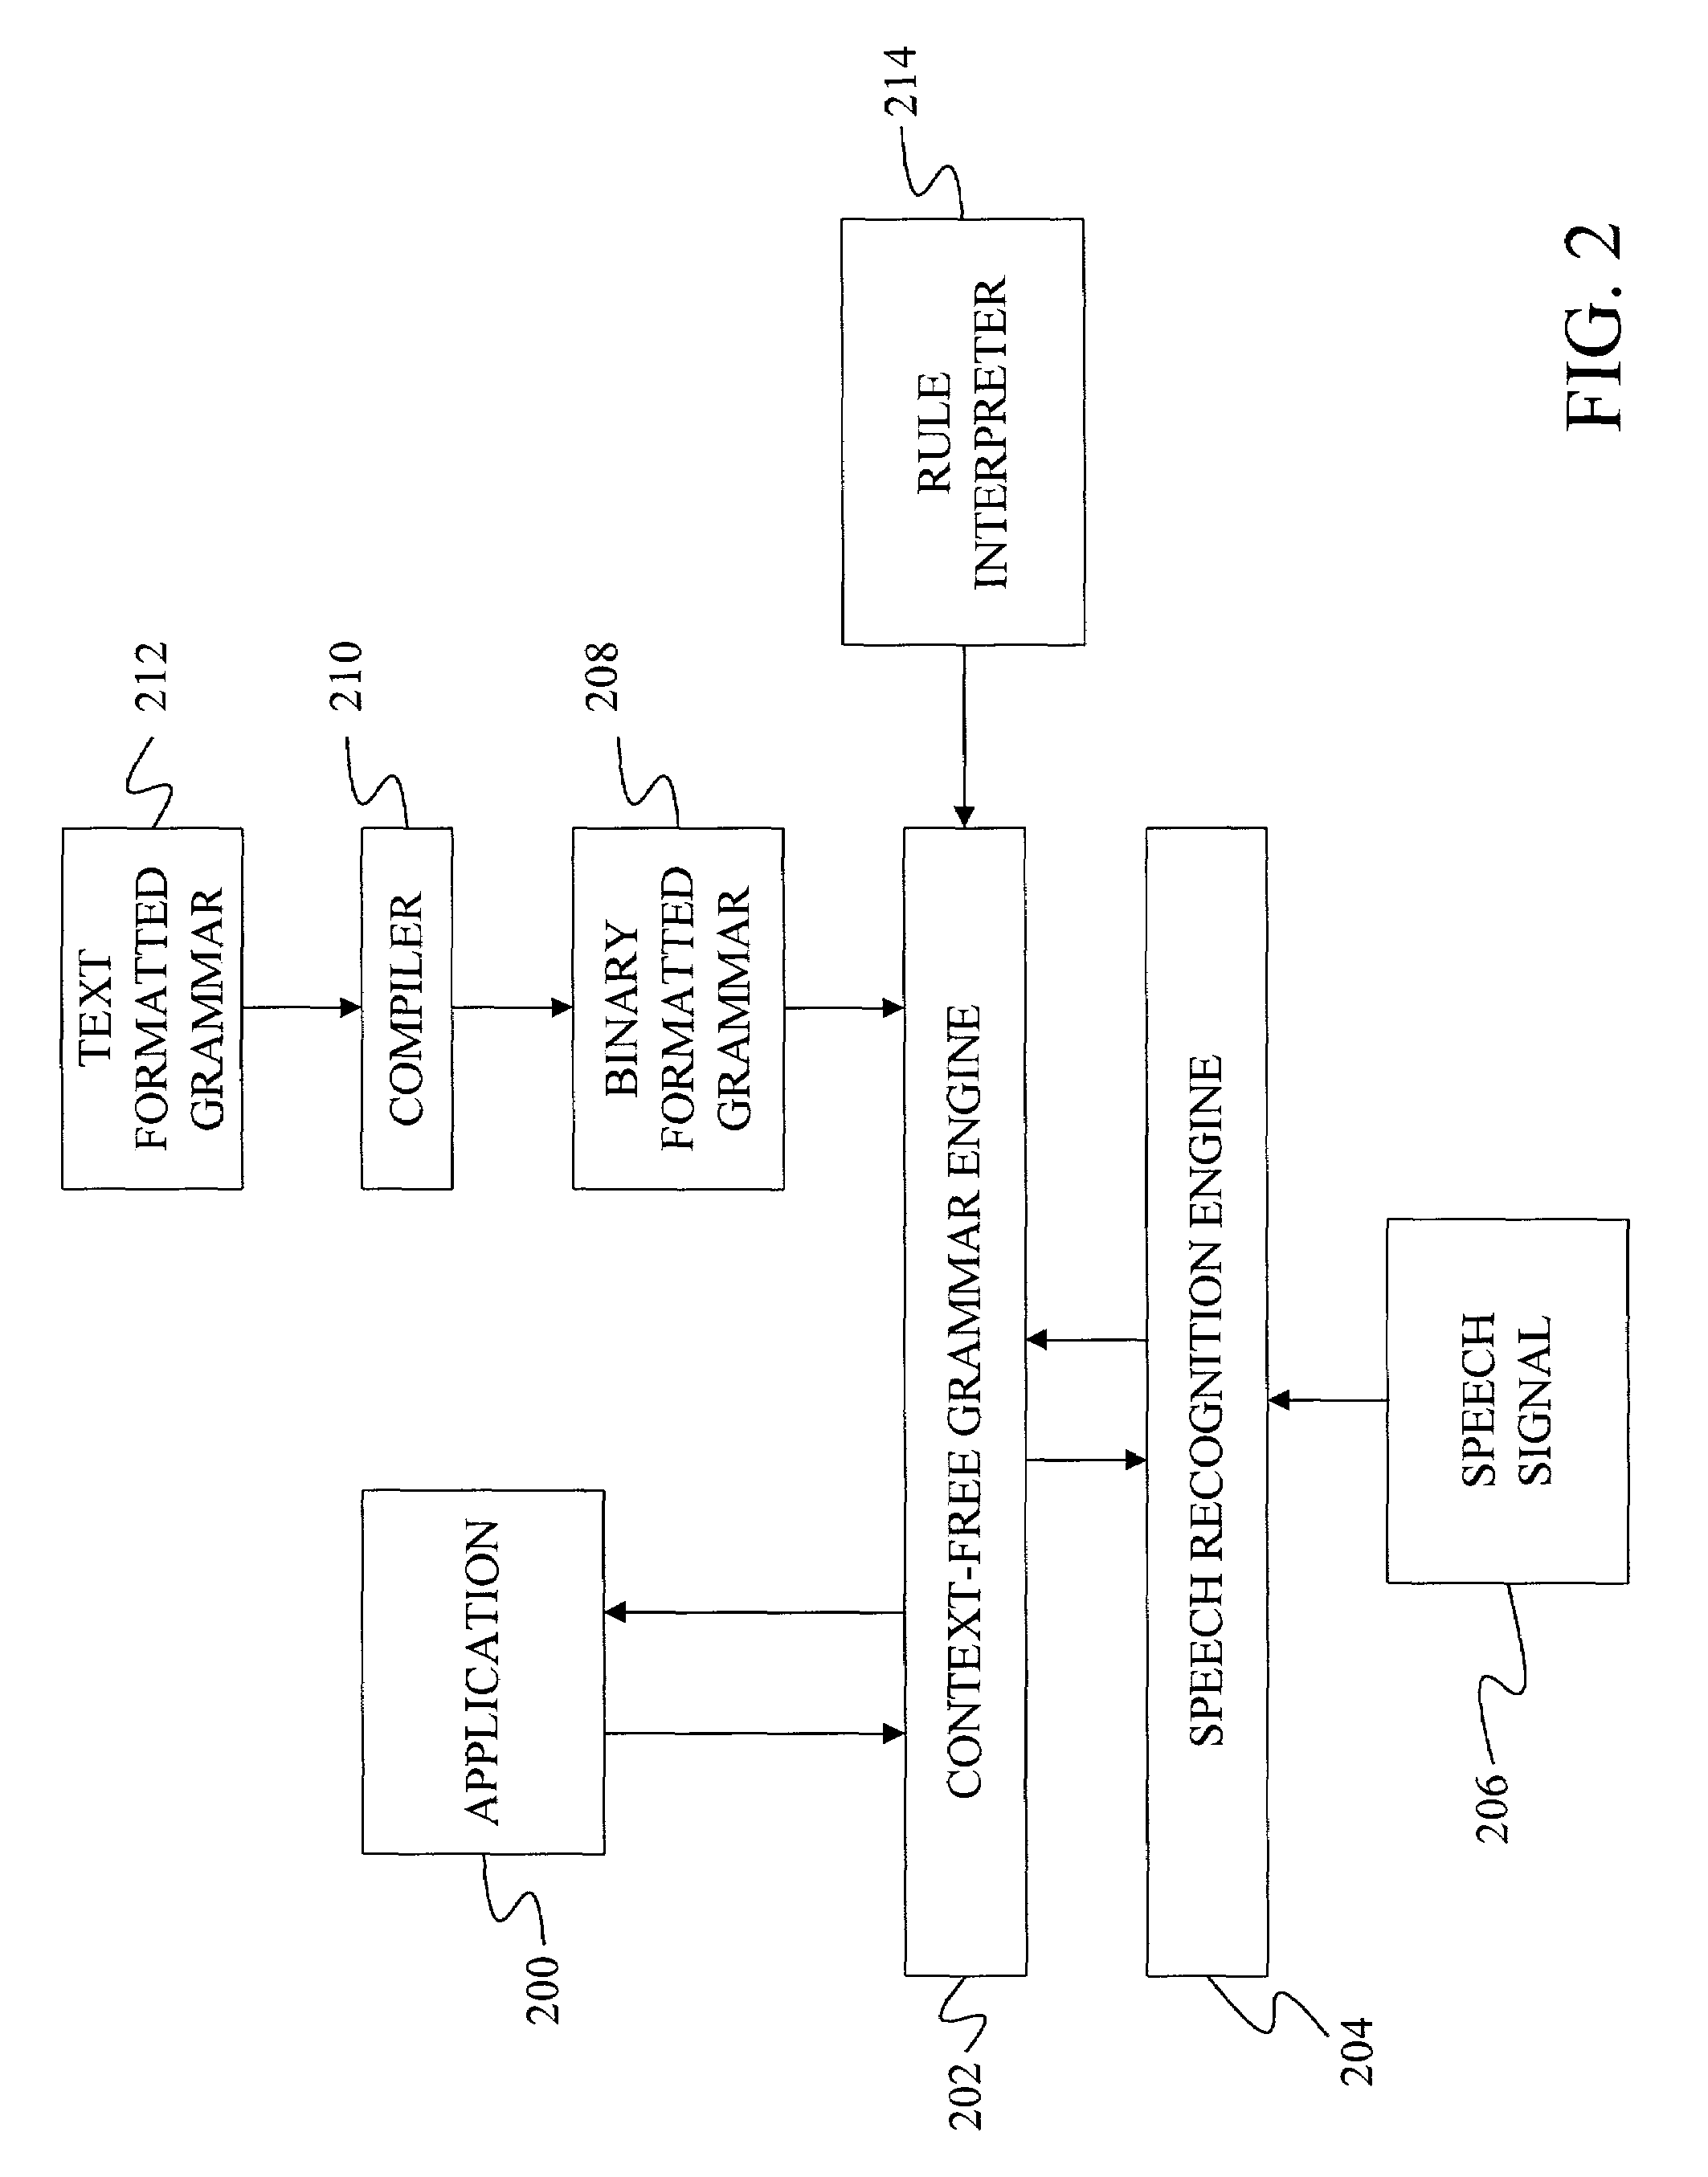 Method and apparatus utilizing speech grammar rules written in a markup language